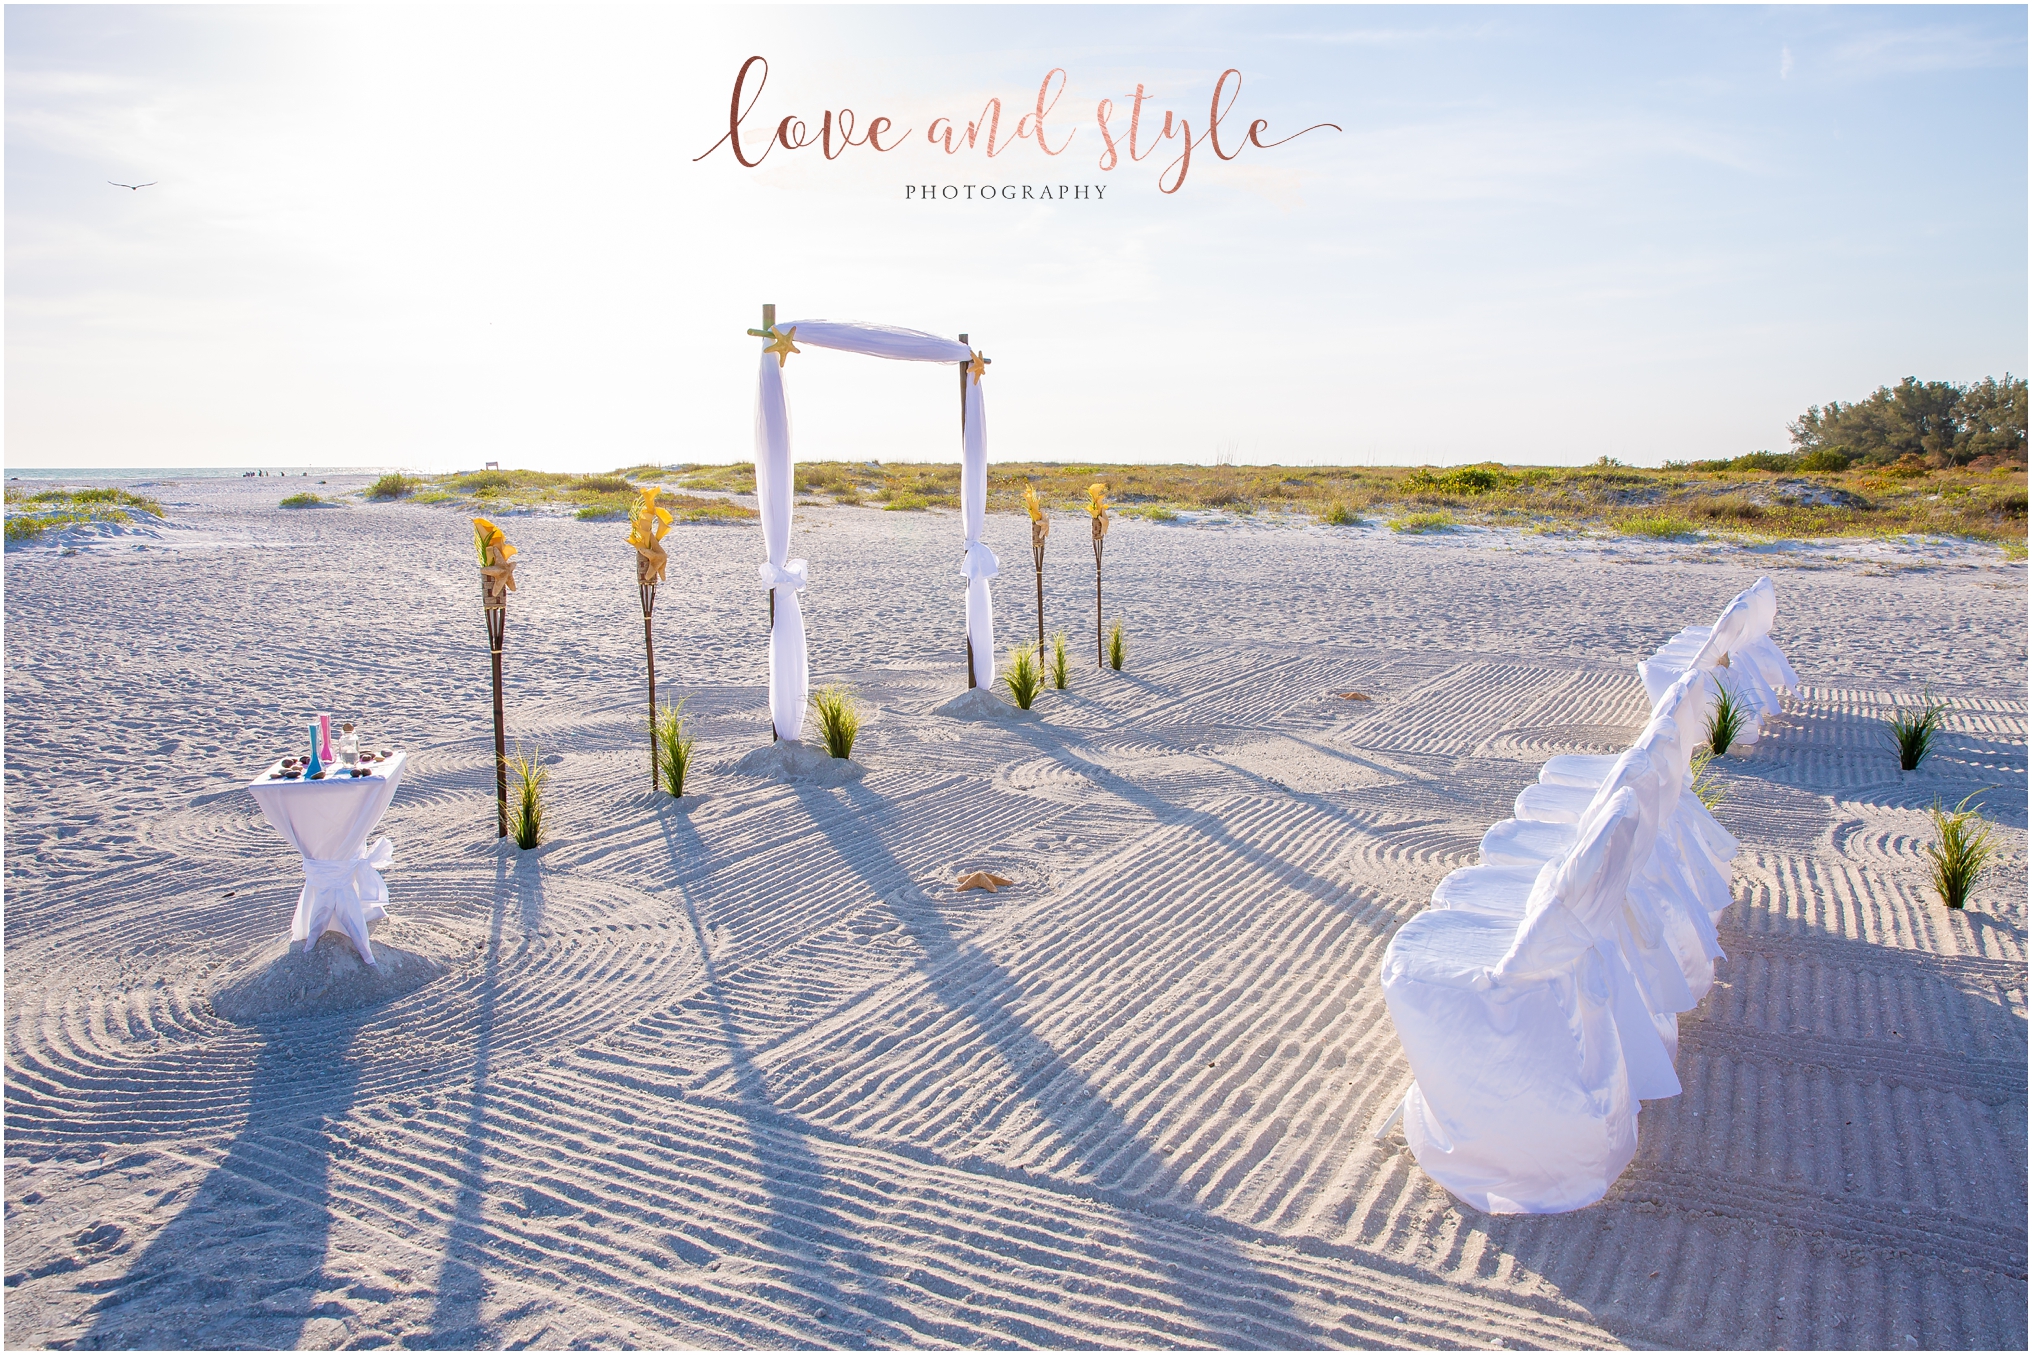 Lido Beach Wedding setup with archway and chairs on the sand